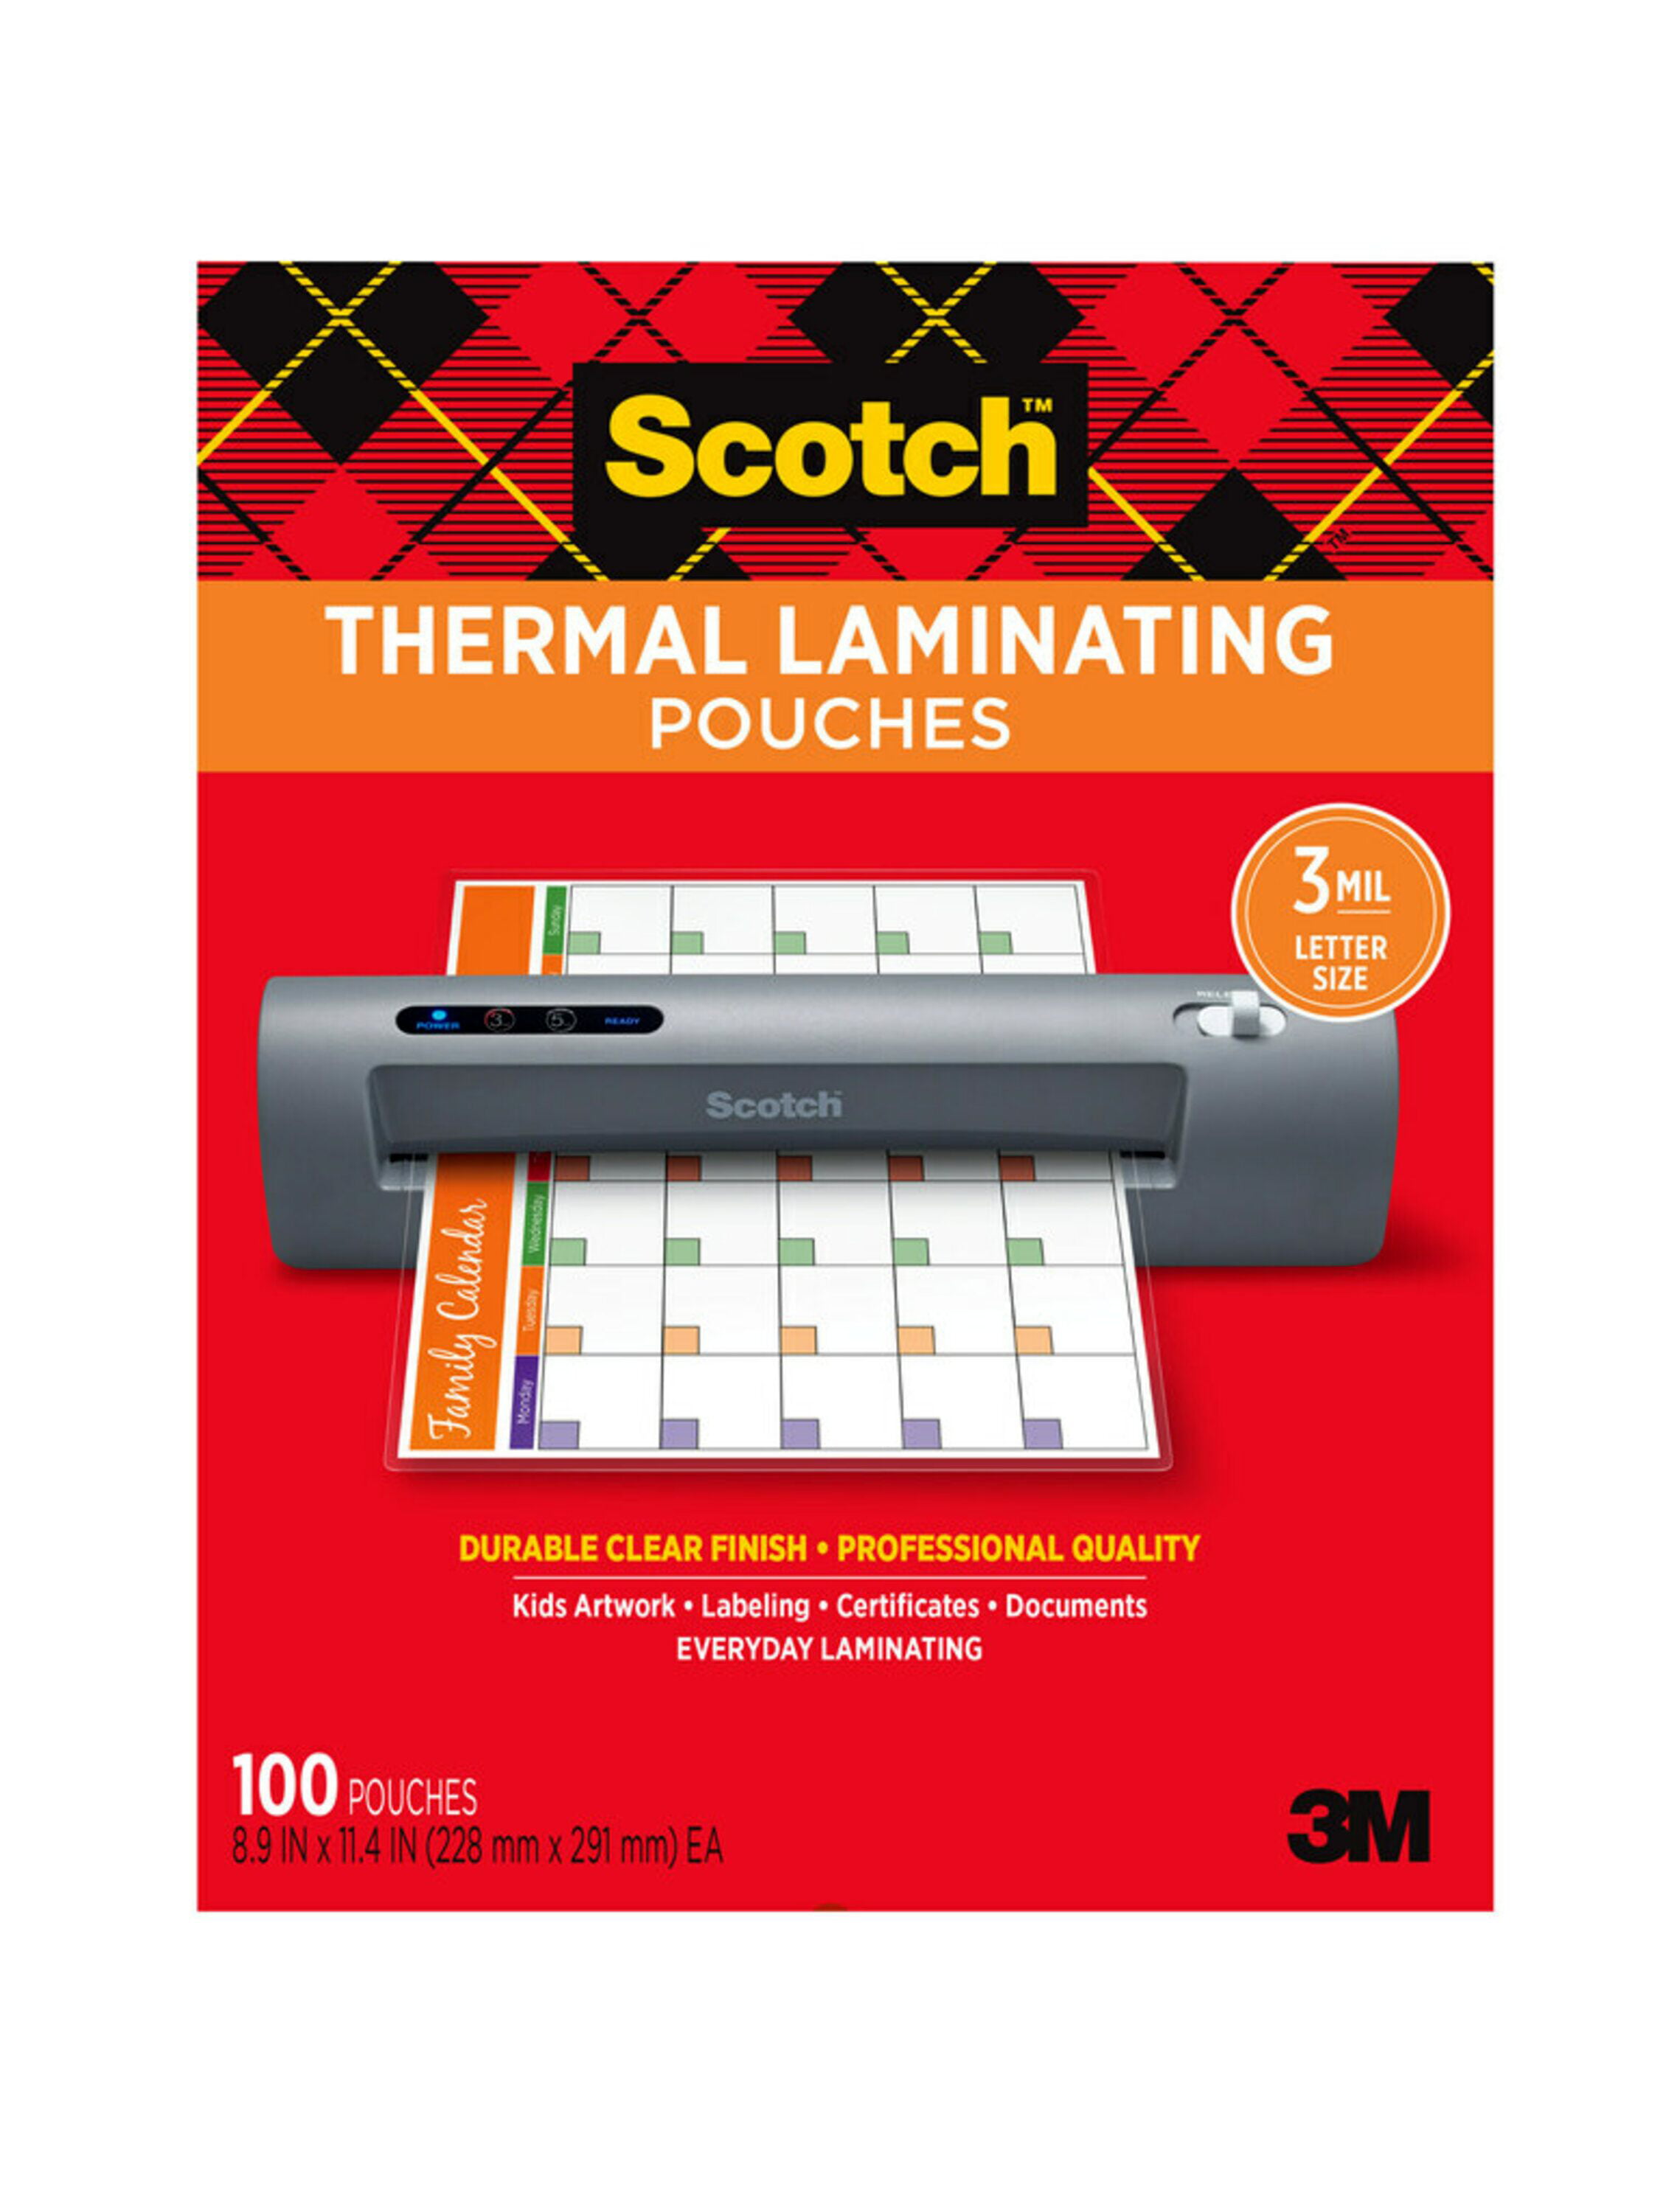 Scotch Photo Size Thermal Laminating Pouches 5 Mil 7x5 20pk for sale online 